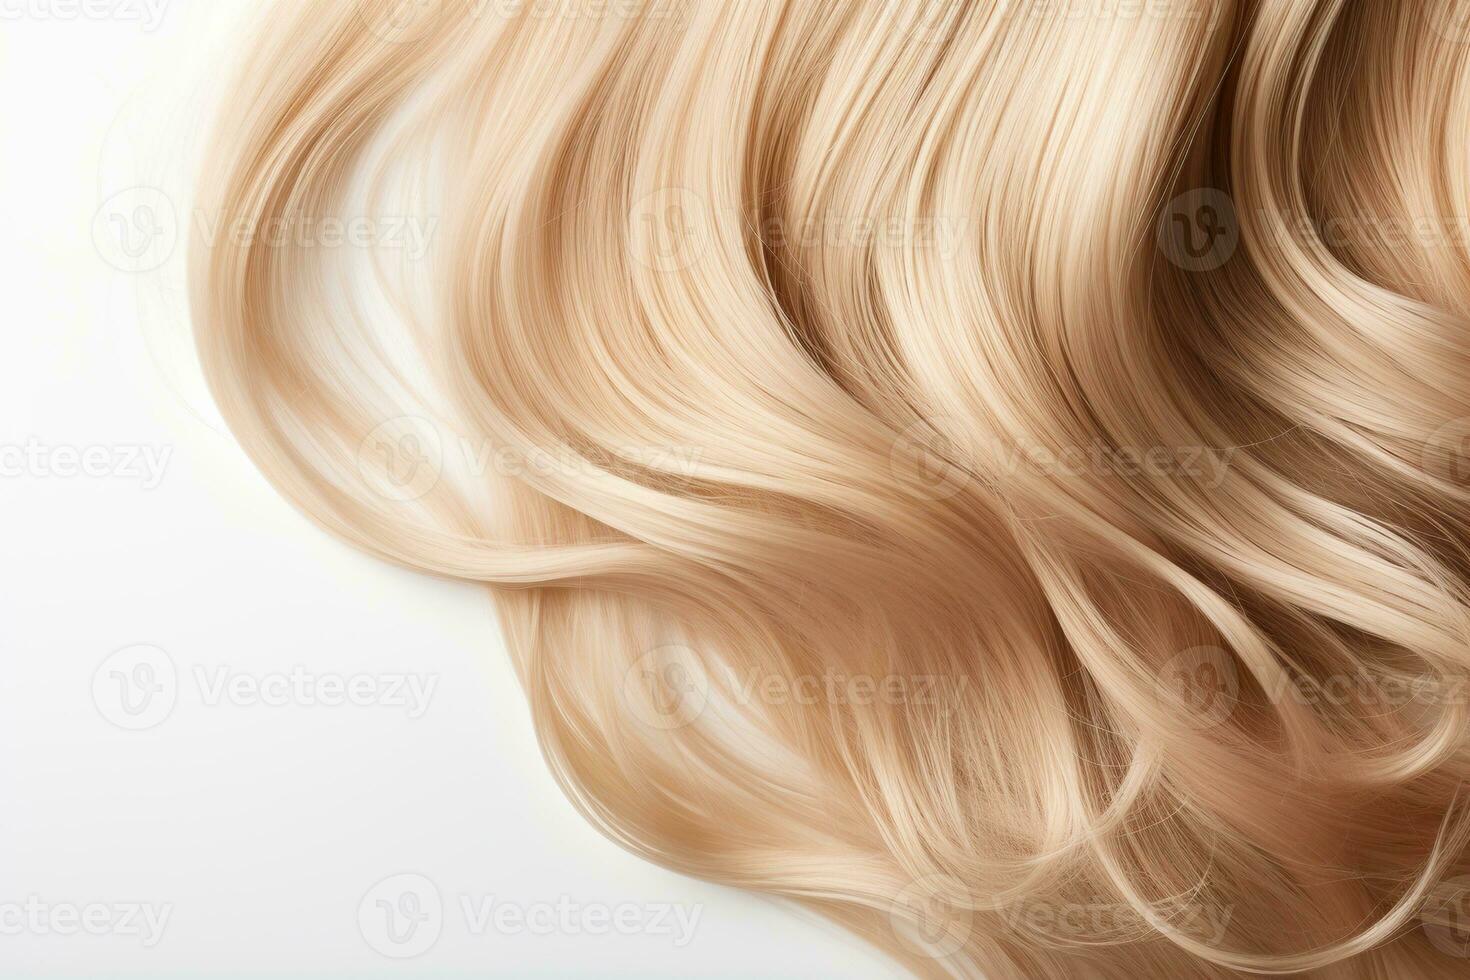 Blonde hair close-up. Women's long blond hair. Beautiful styling of wavy shiny curls. Hair coloring. Hairdressing treatments photo